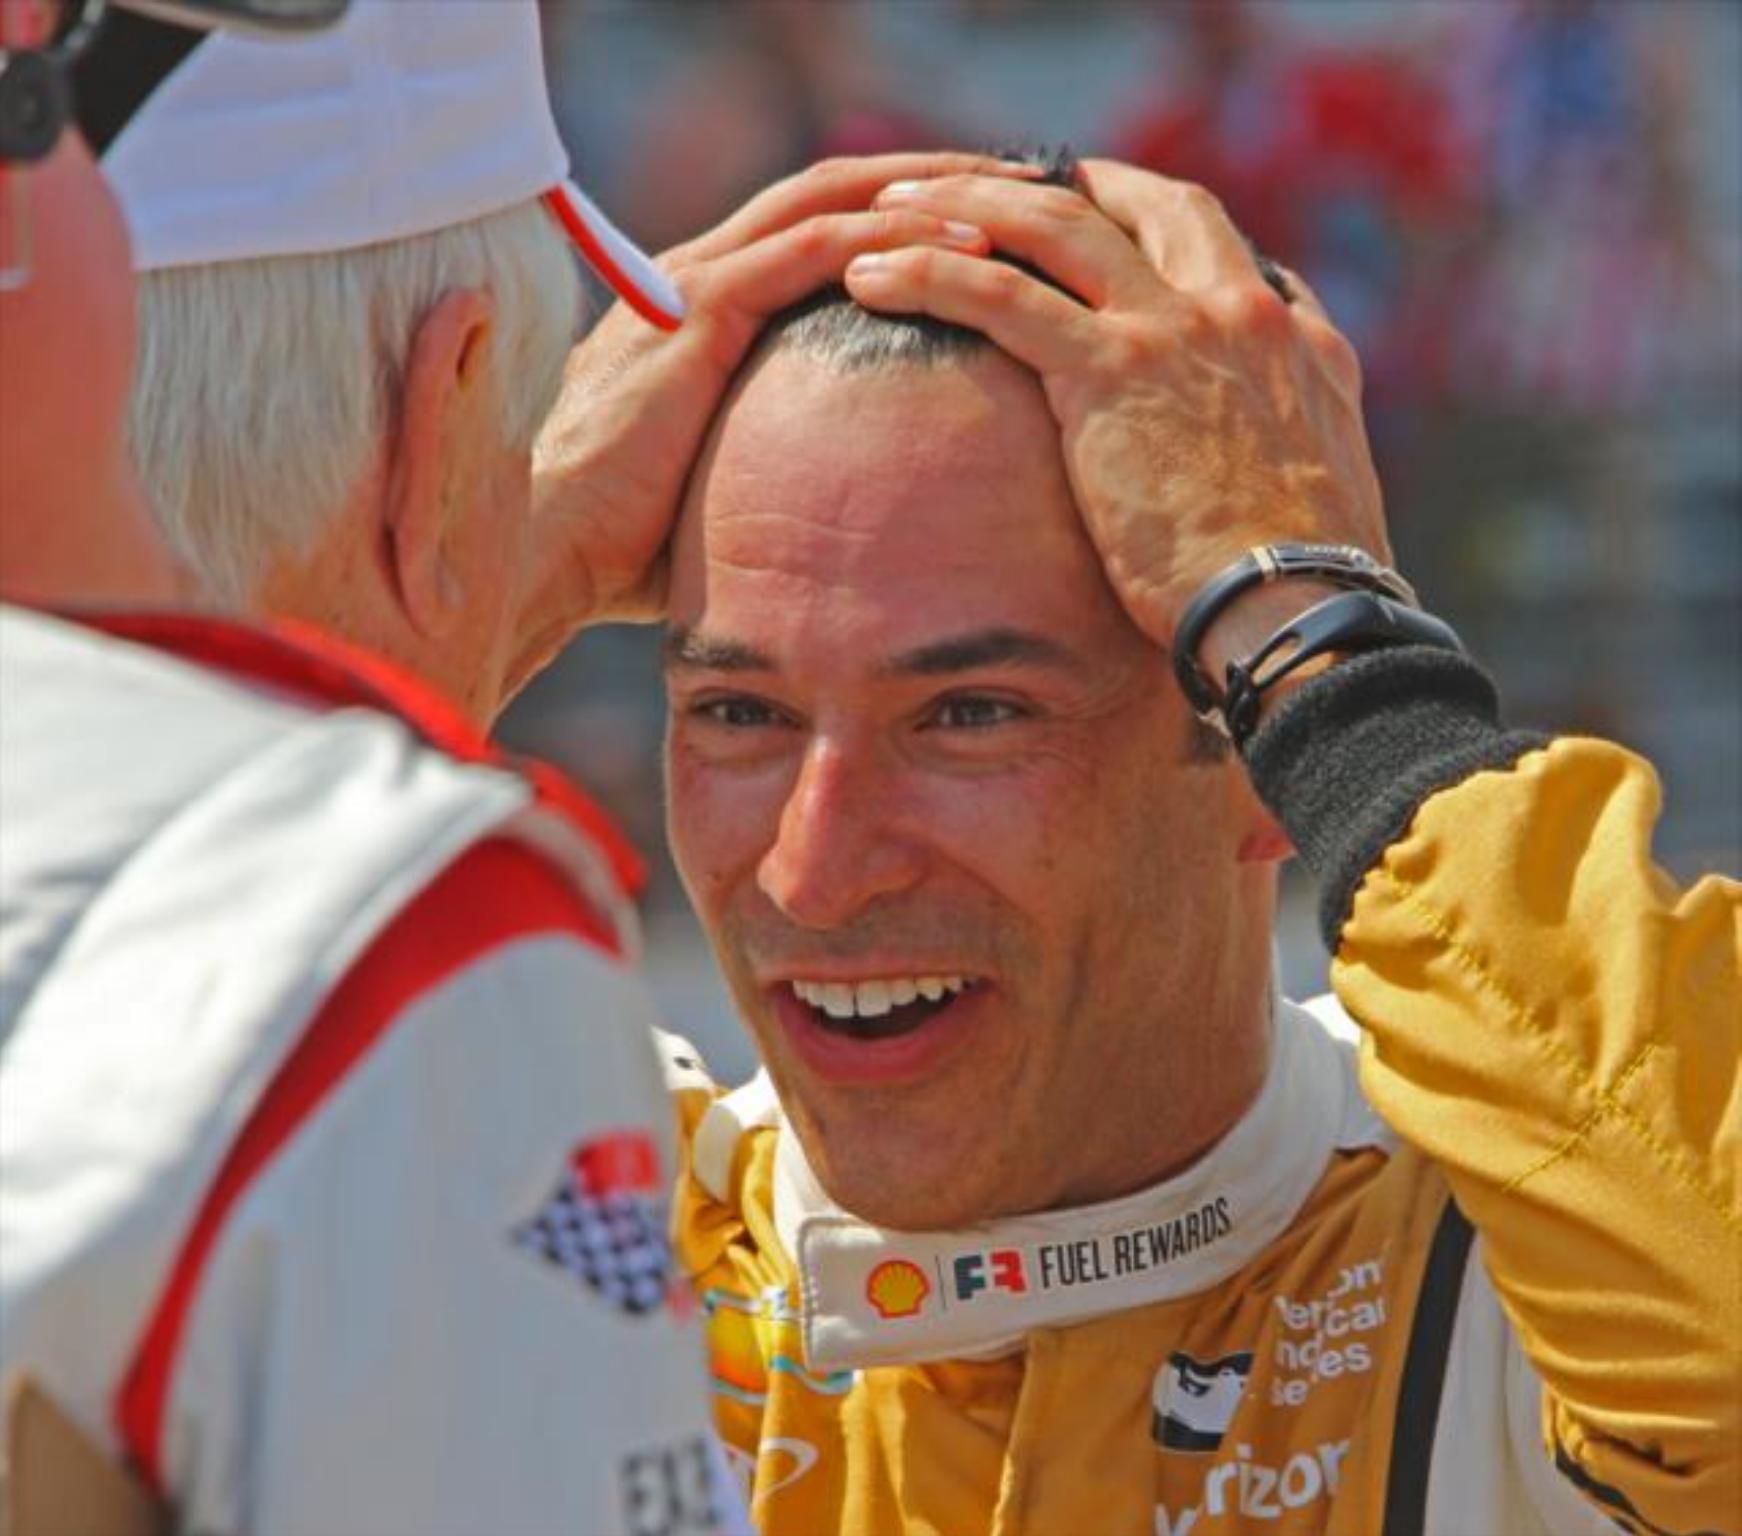 Helio Castroneves saw a potential 4th Indy 500 victory slip away 